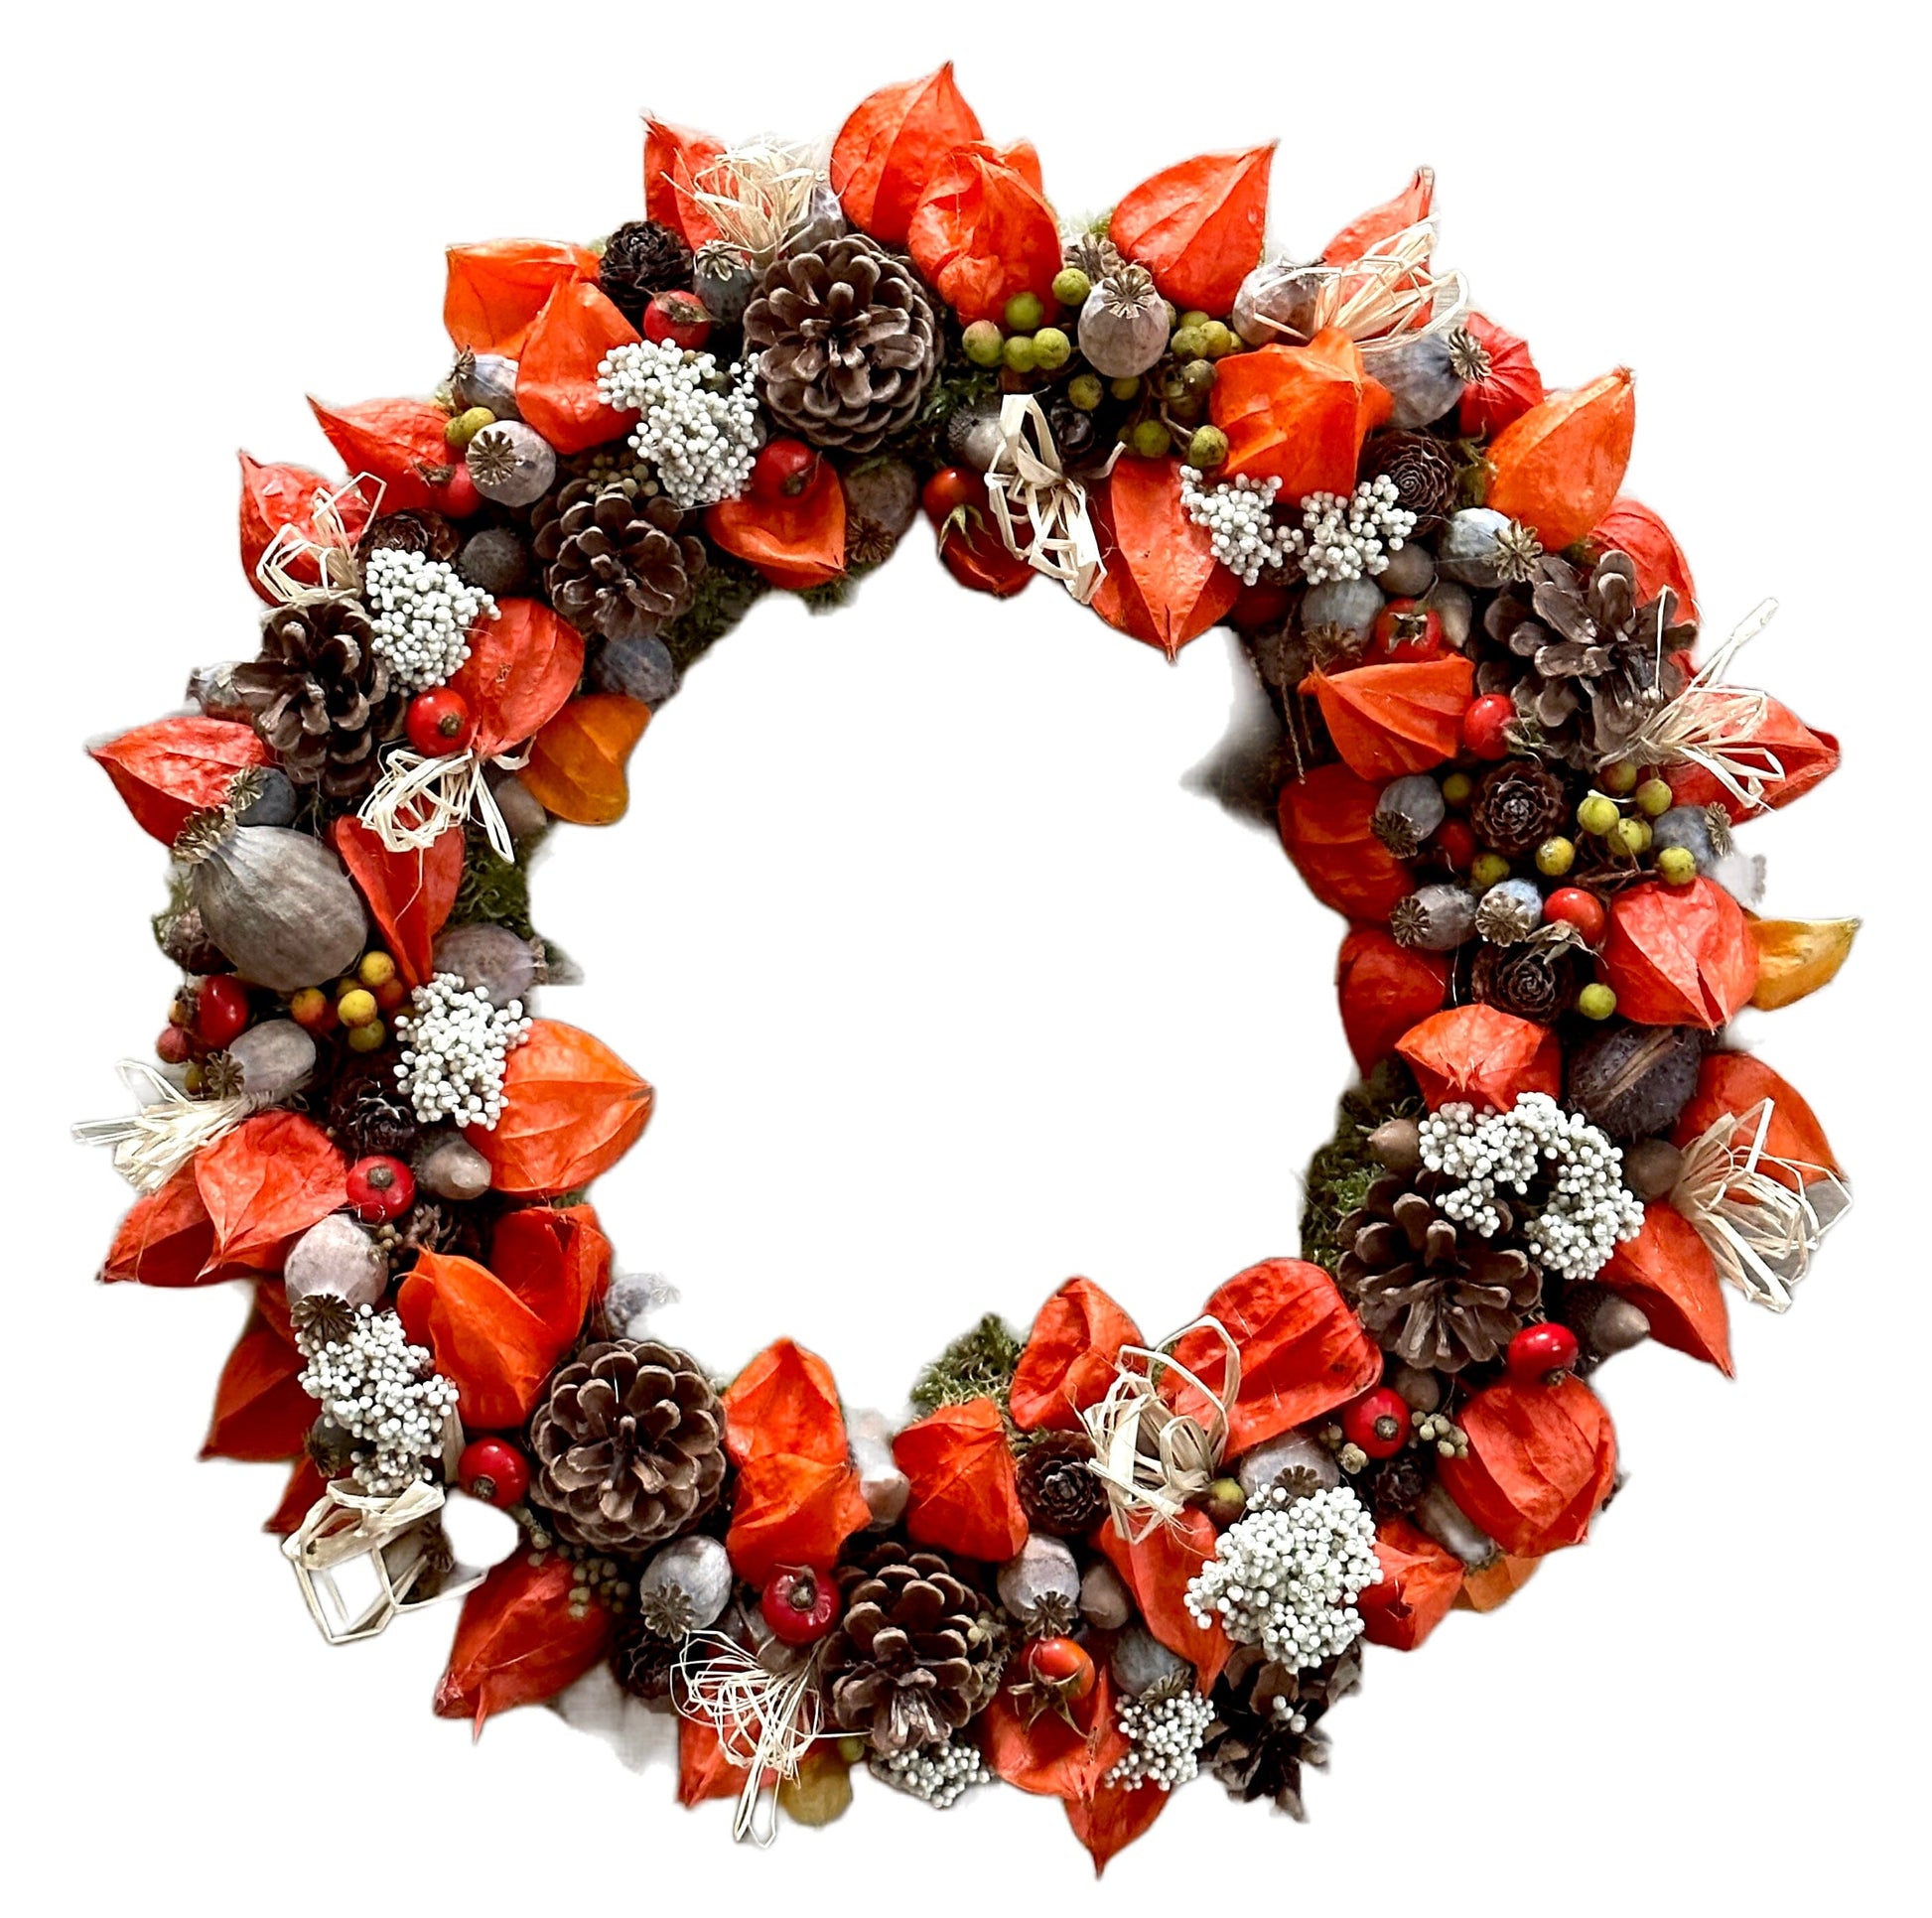 Autumn Wreath with Cones and Physalis